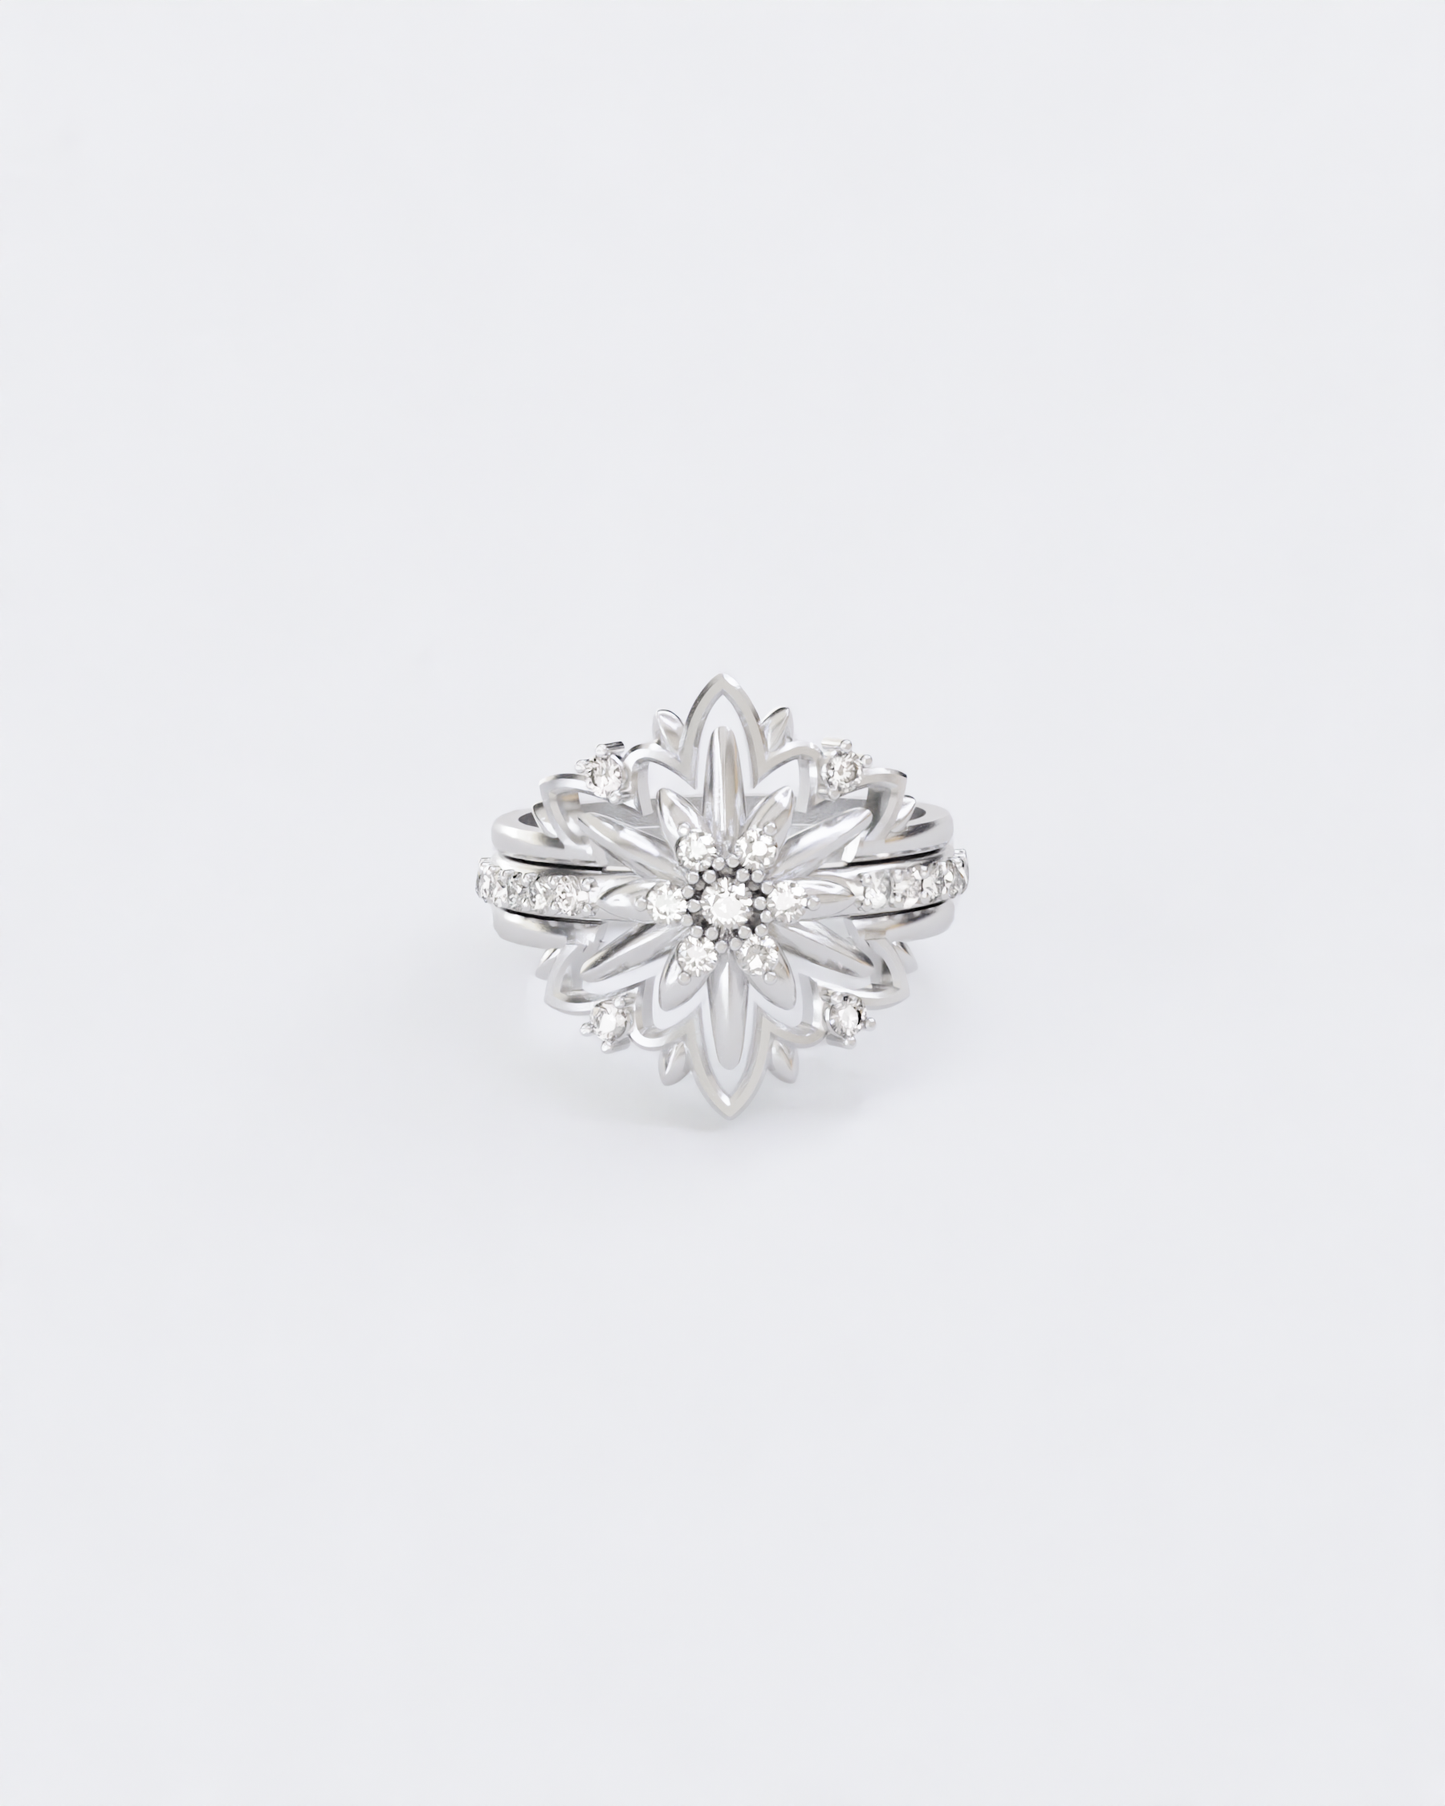 Gold ring Edelweiss with diamonds